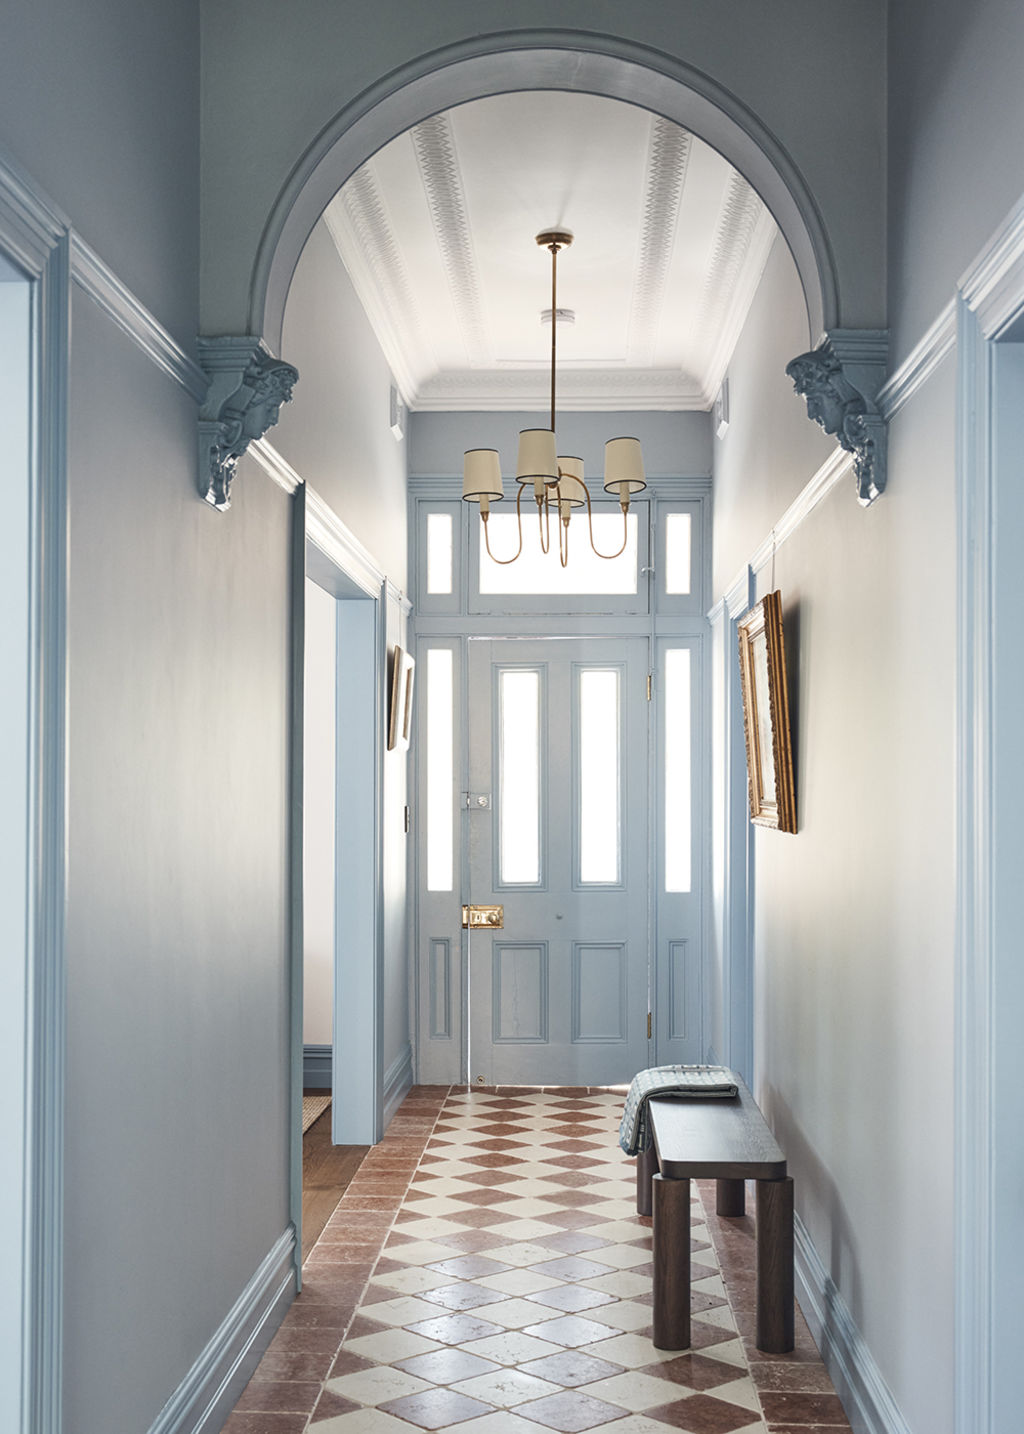 The home's decorative ceilings and archways are original. Photo: Damian Bennett